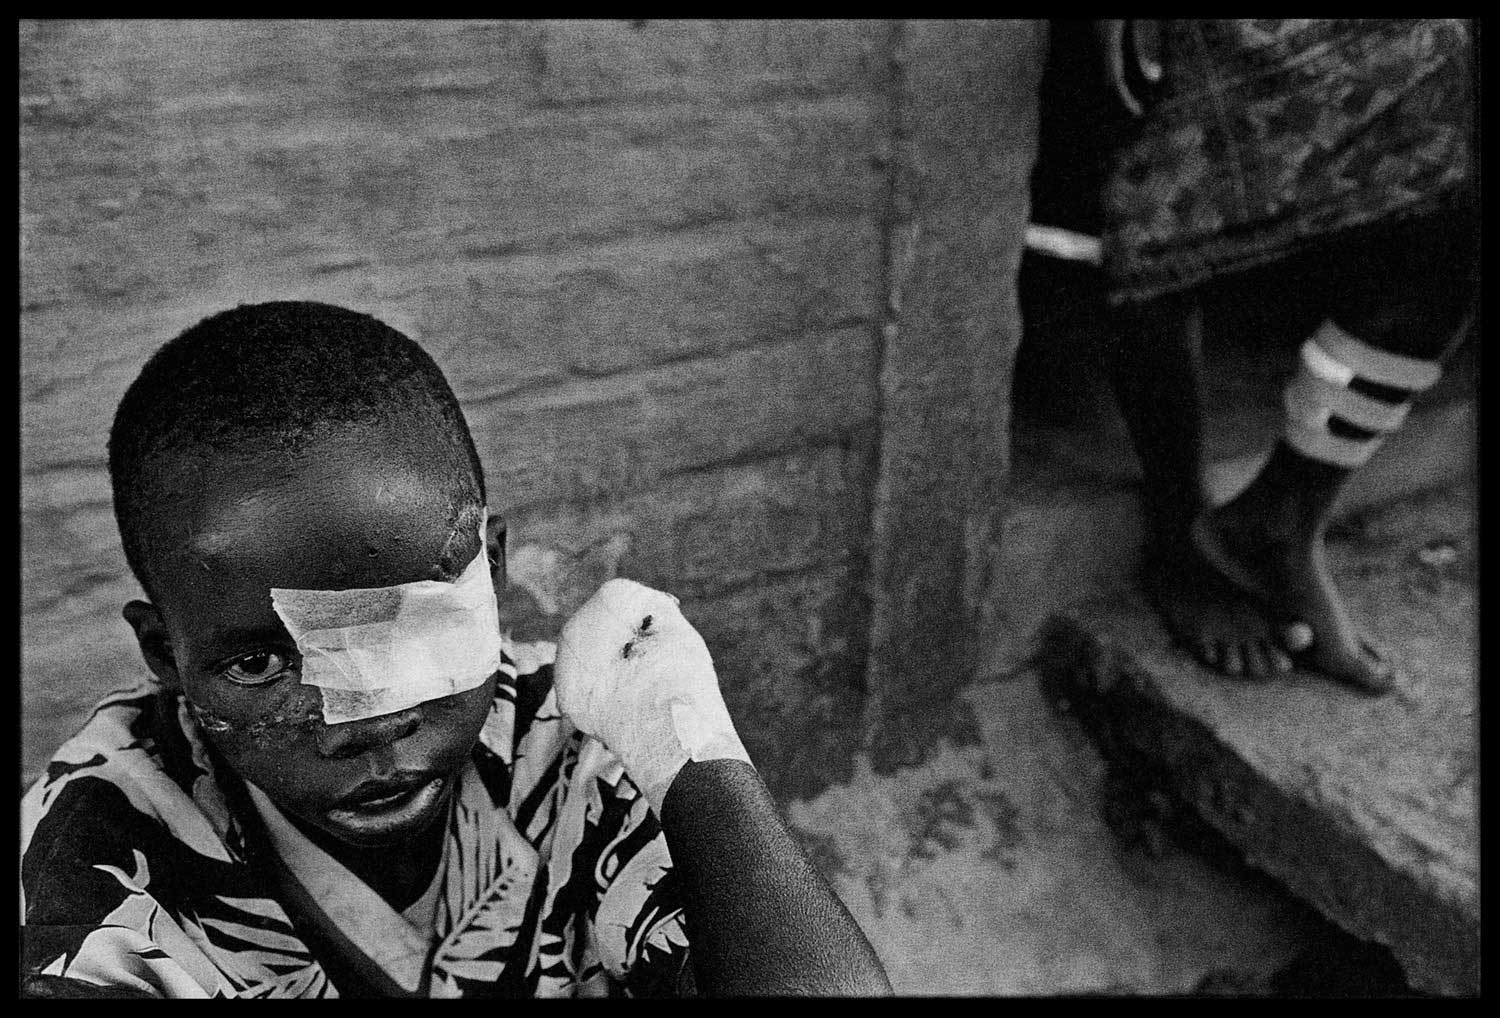 At the Red Cross clinic in Nyanza. Tutsis who had been freed from the death camp were treated for their wounds, Rwanda, 1994.